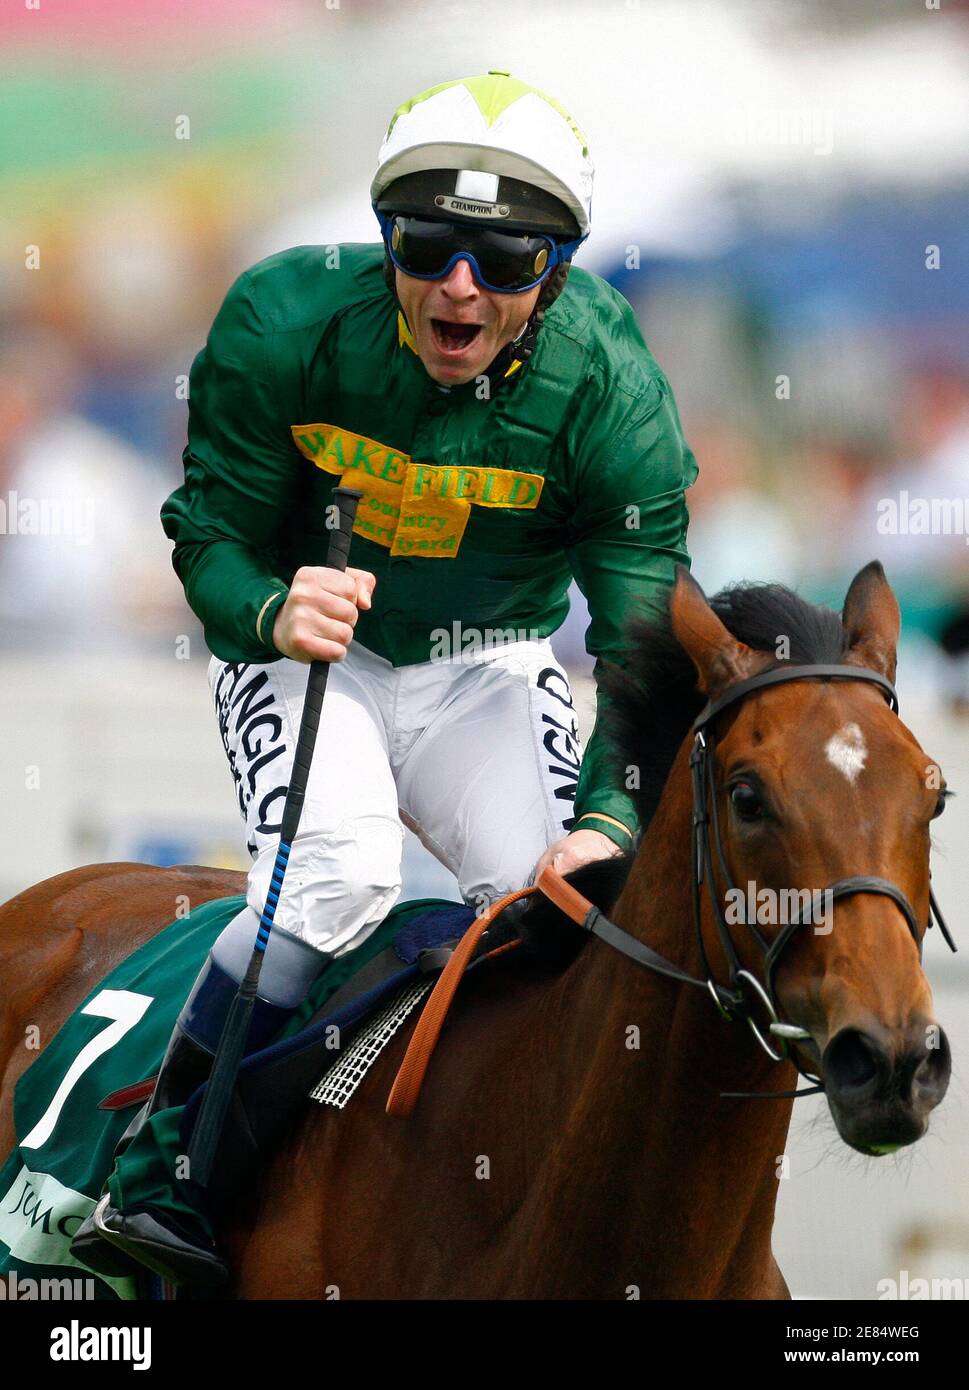 Seb Sanders riding Look Here celebrates as he wins the Oak during the Epsom Derby Festival at Epsom Downs in Surrey, southern England June 6, 2008. REUTERS/Alessia Pierdomenico (BRITAIN) Stock Photo